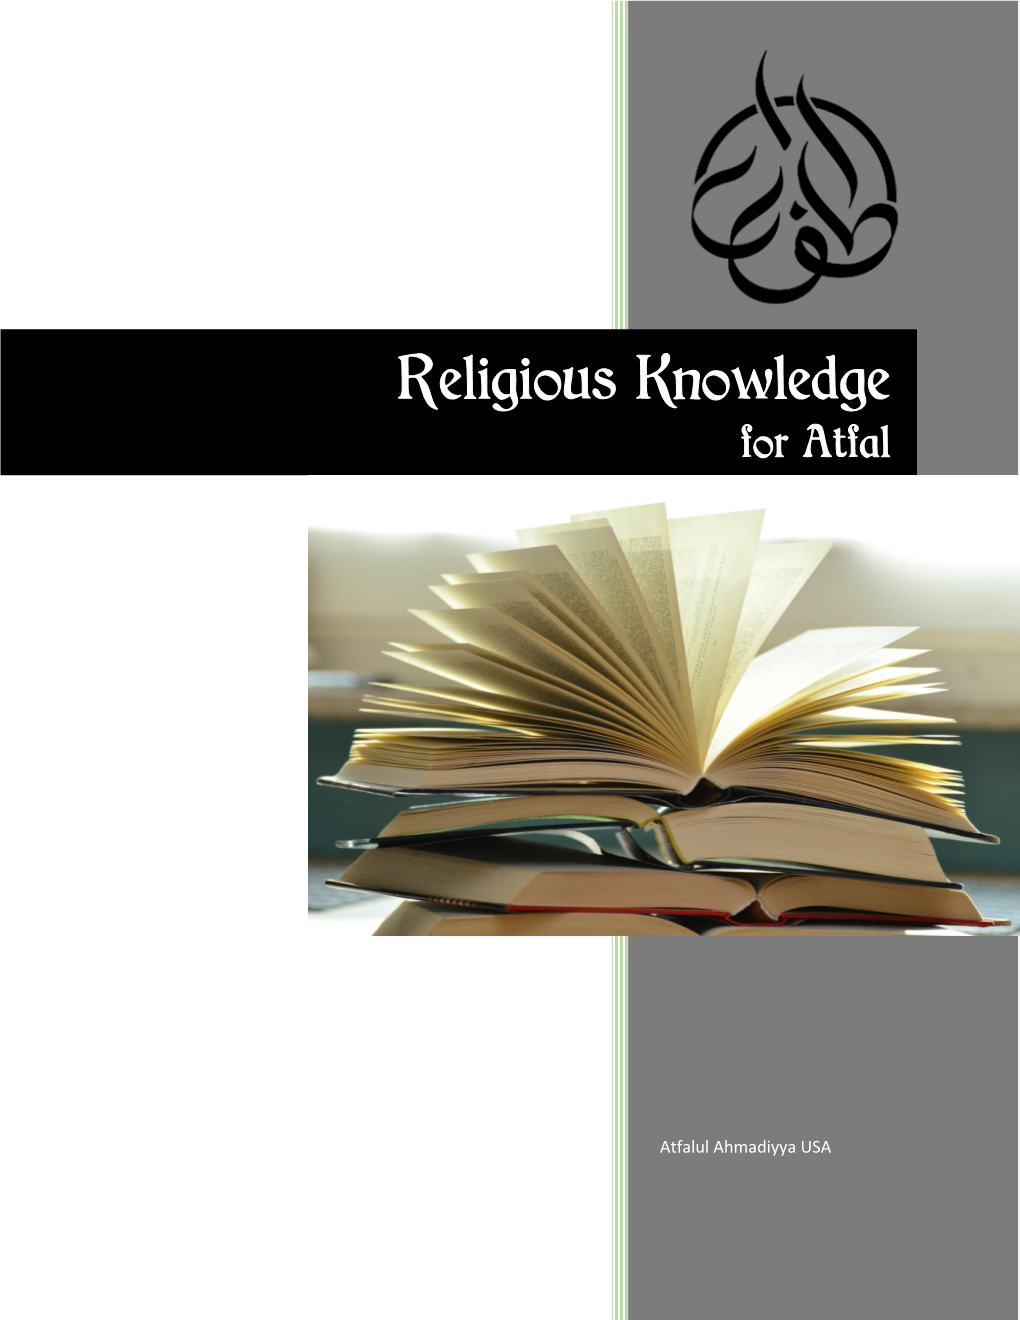 Religious Knowledge for Atfal